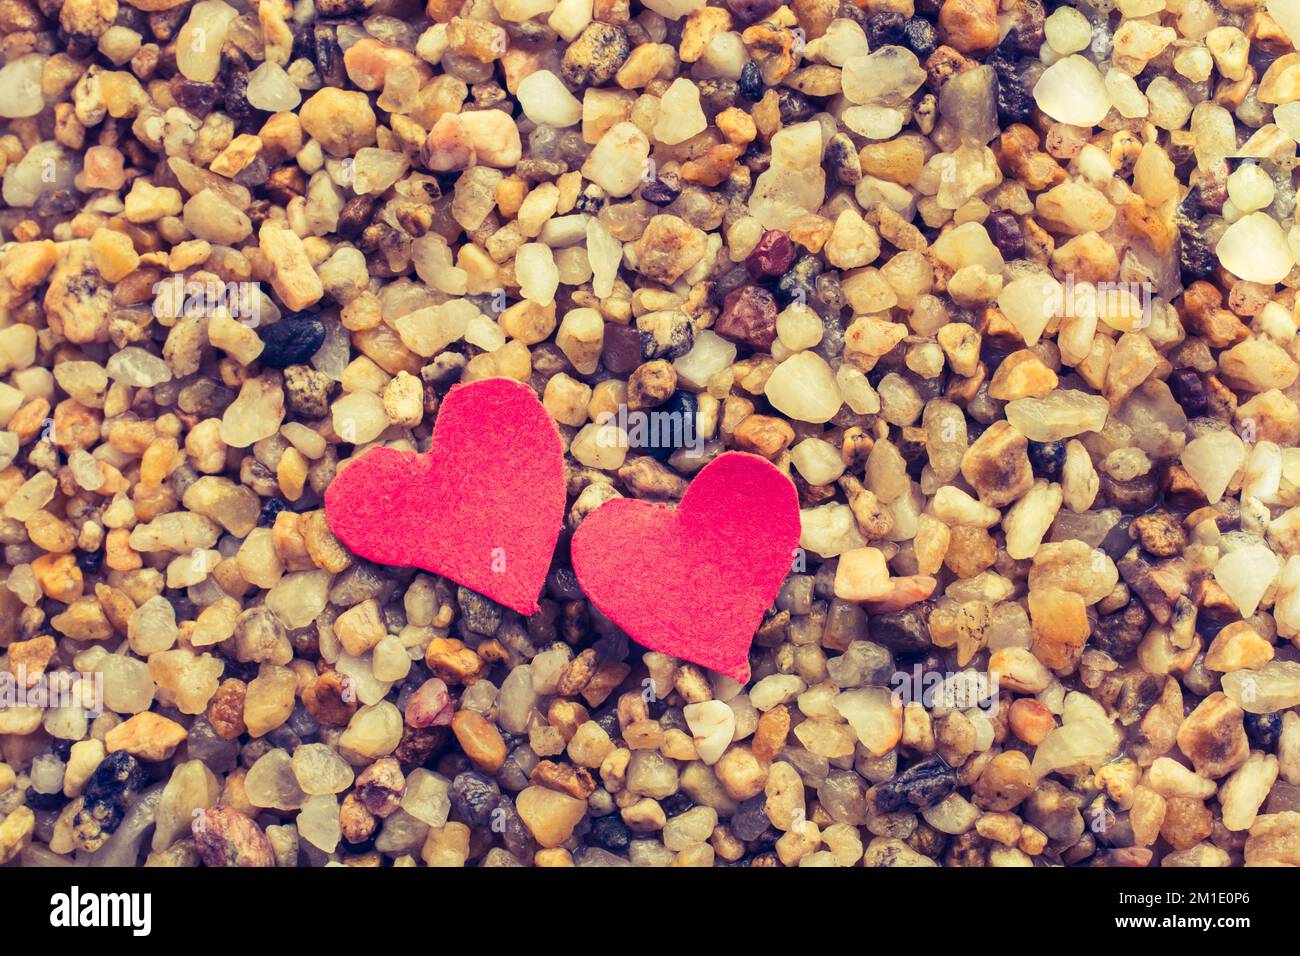 Love concept with heart shaped icon in view Stock Photo